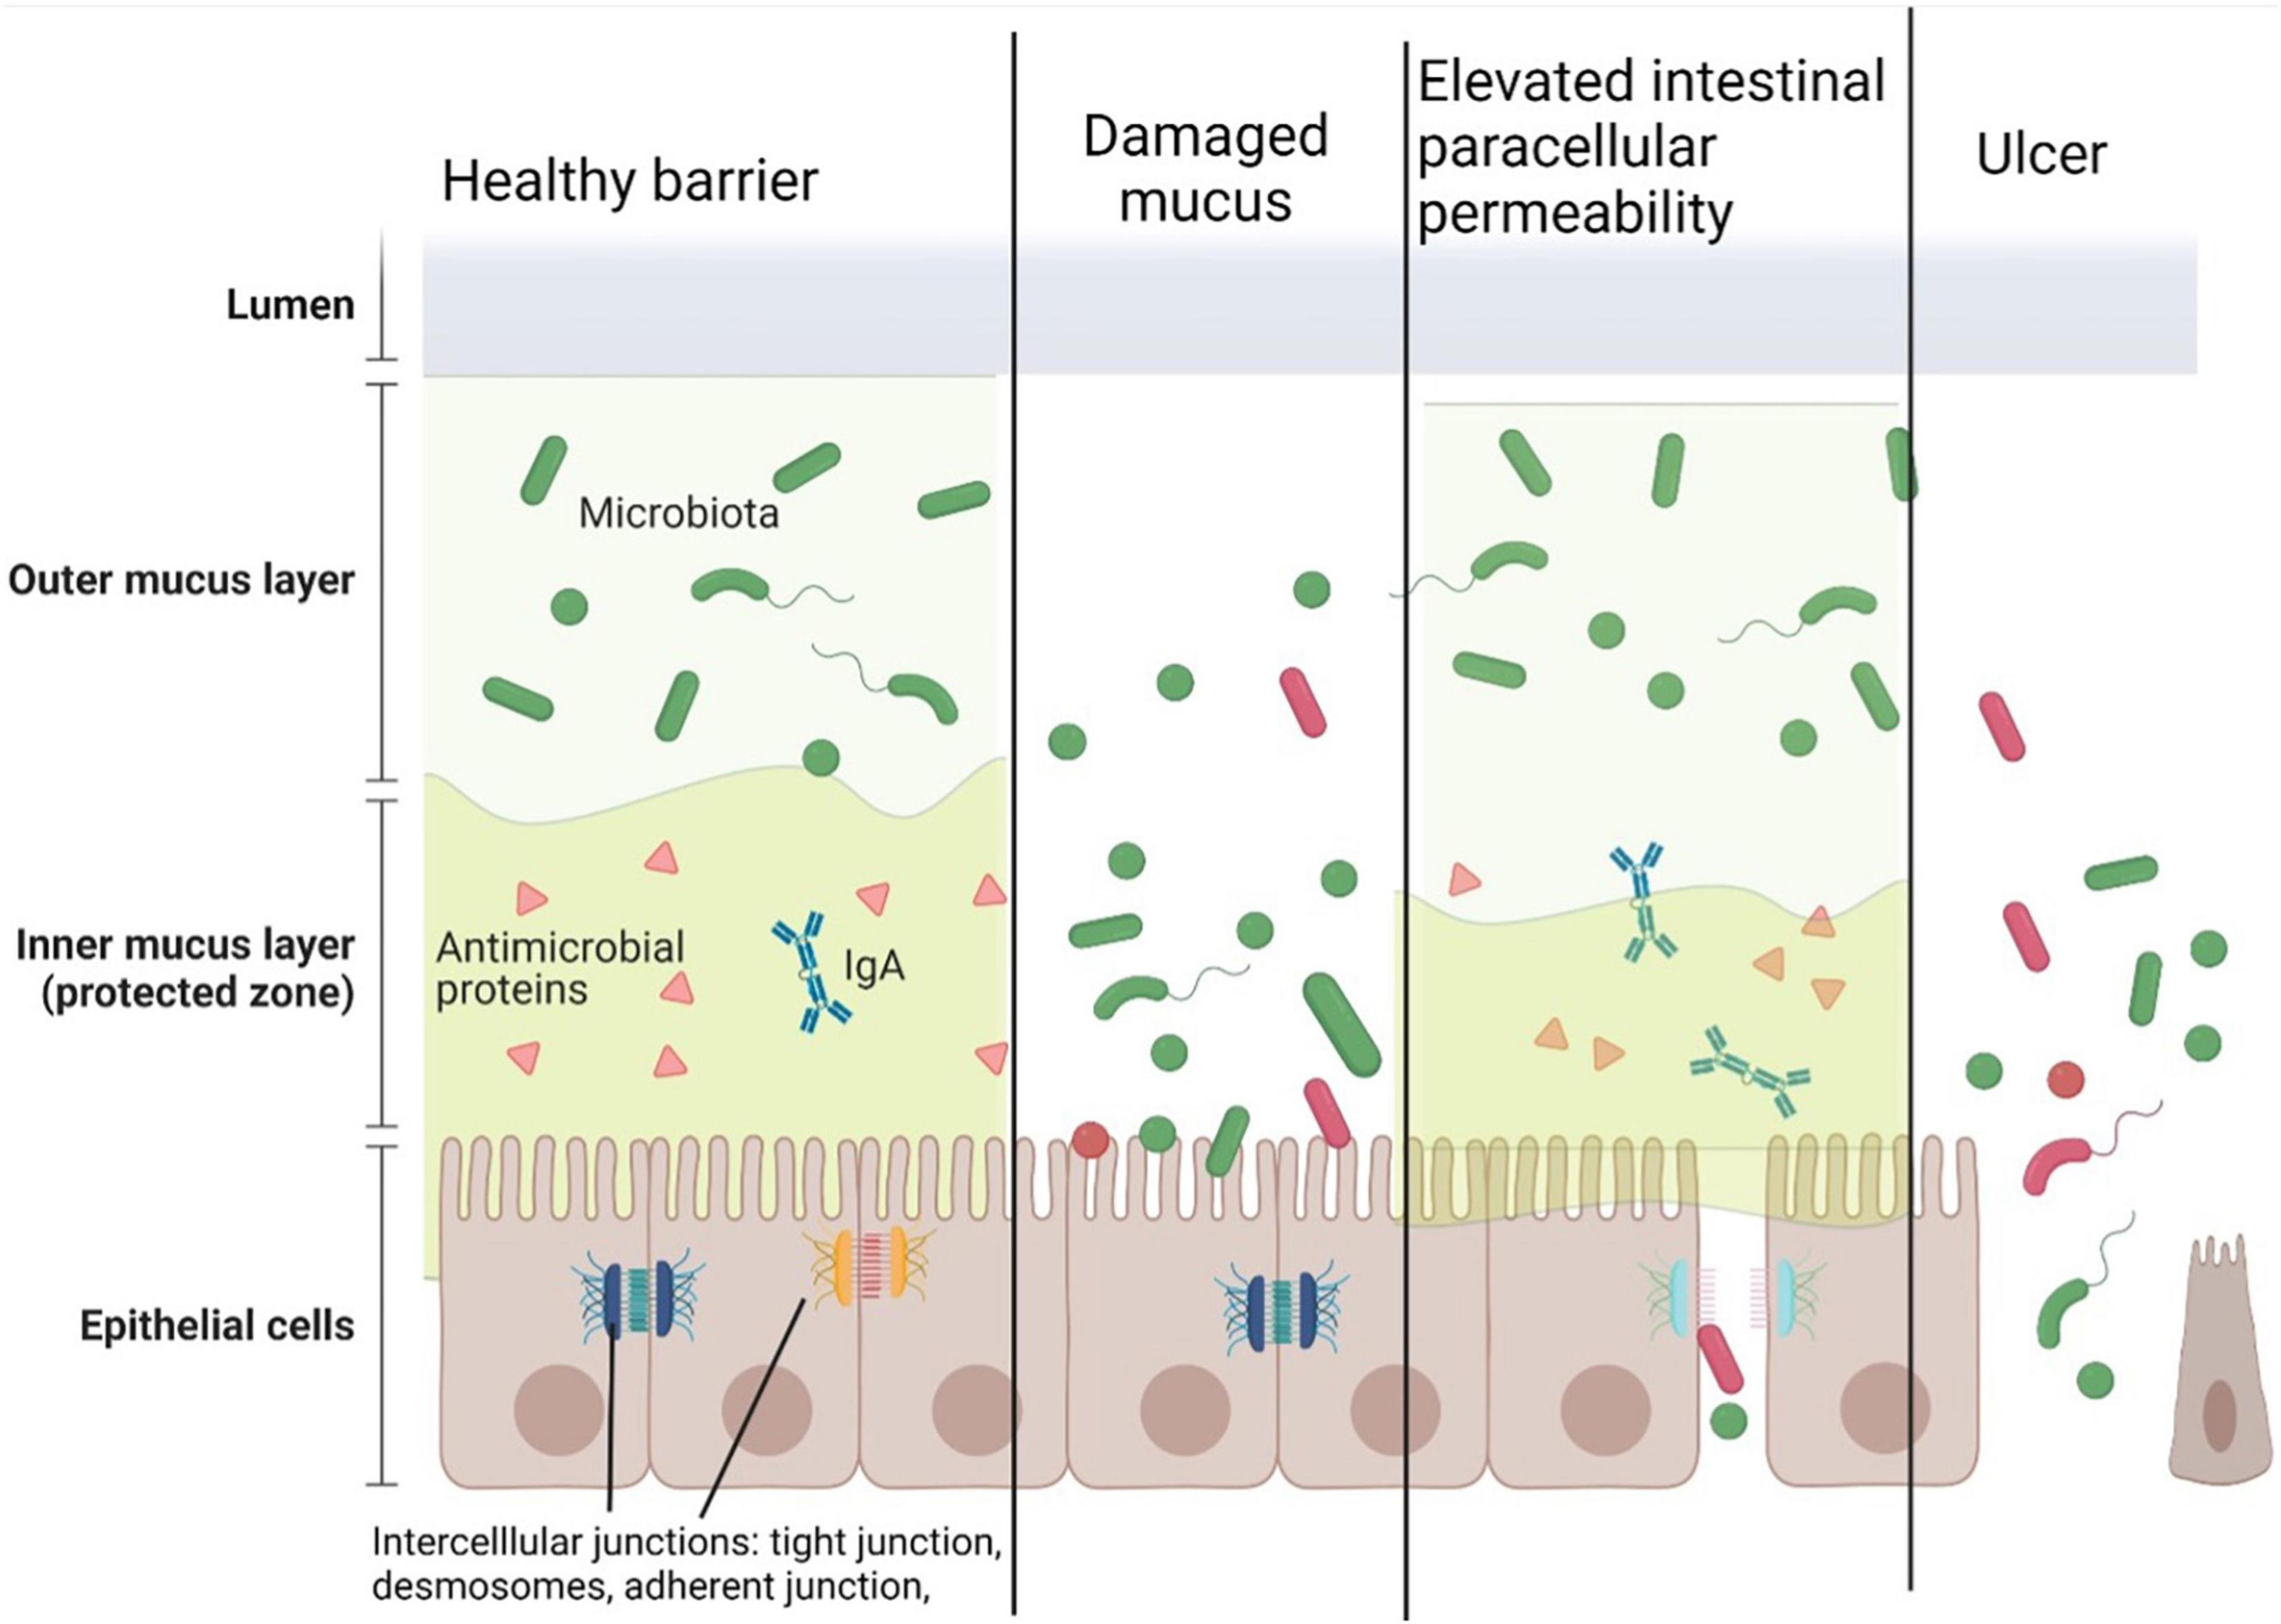 Frontiers The Influence of Nutrition on Intestinal Permeability and the Microbiome in Health and Disease